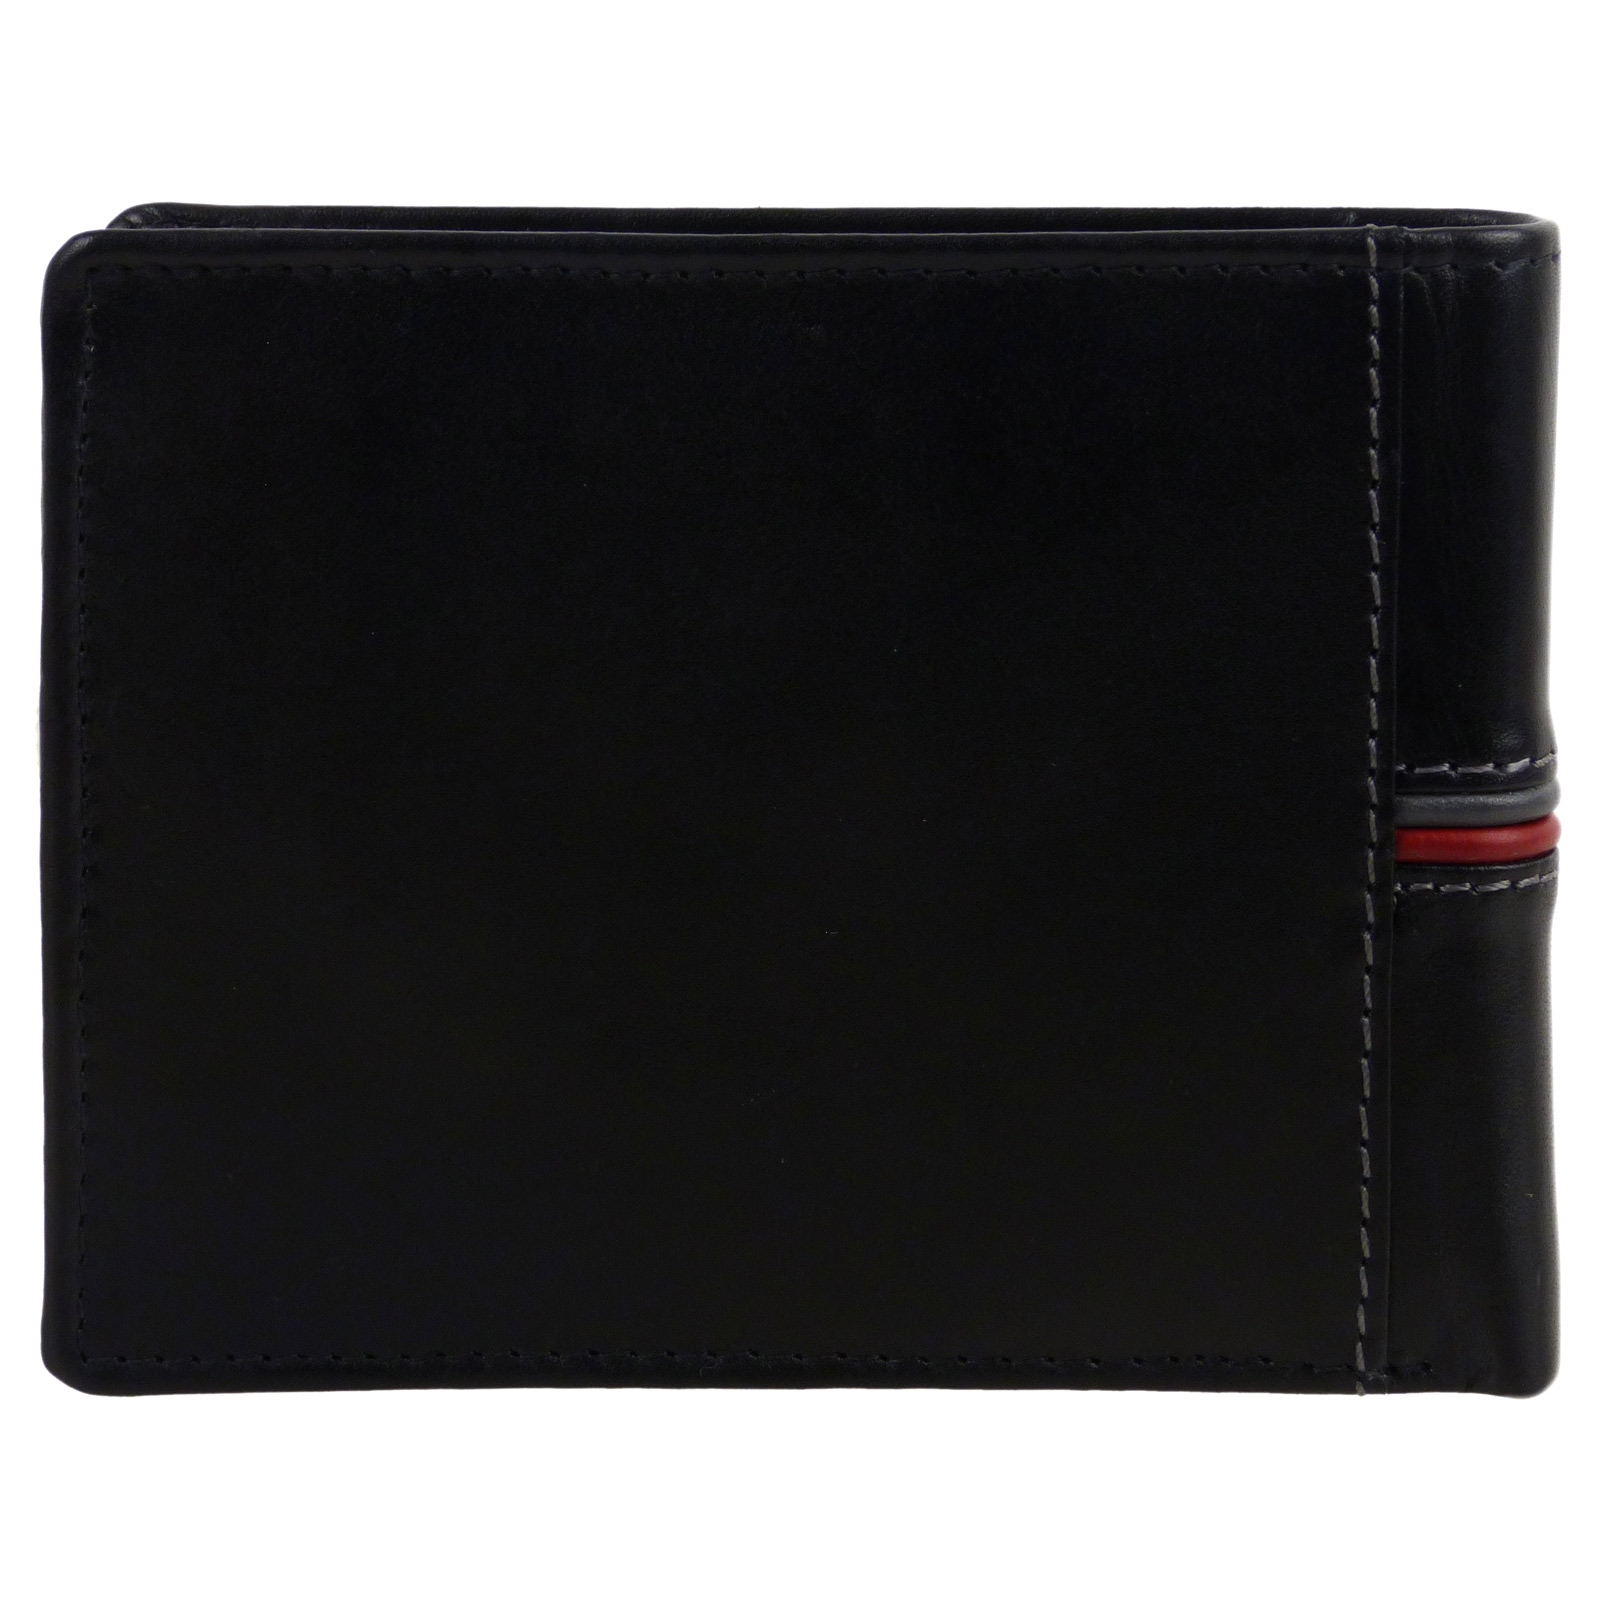 Mens Leather Wallet by London Leathergoods Coin Section RFID Protected | eBay